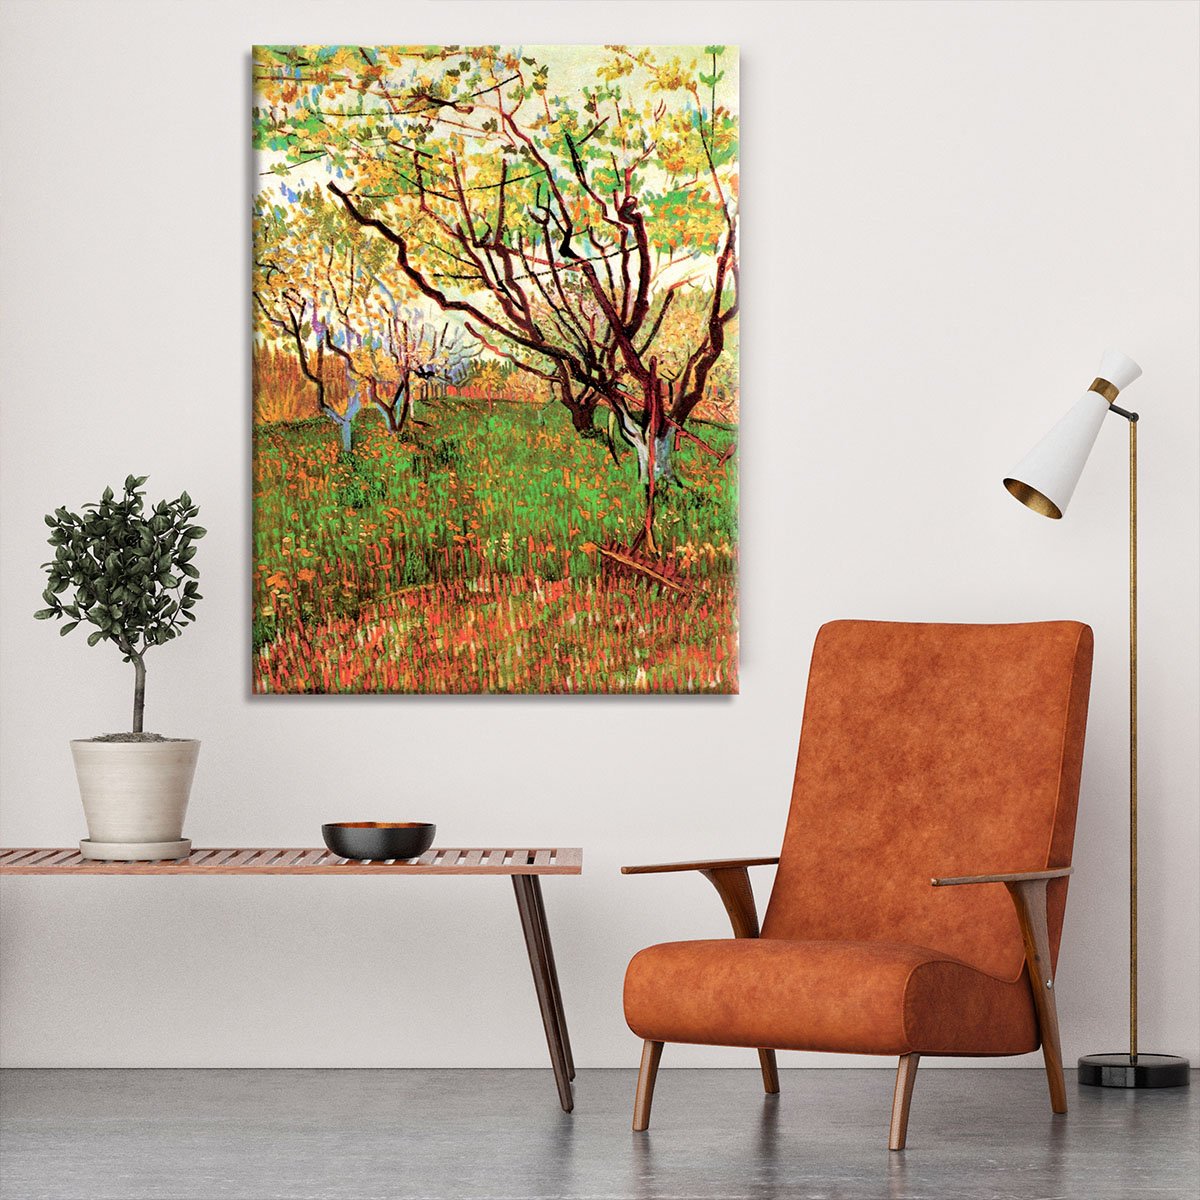 Orchard in Blossom by Van Gogh Canvas Print or Poster